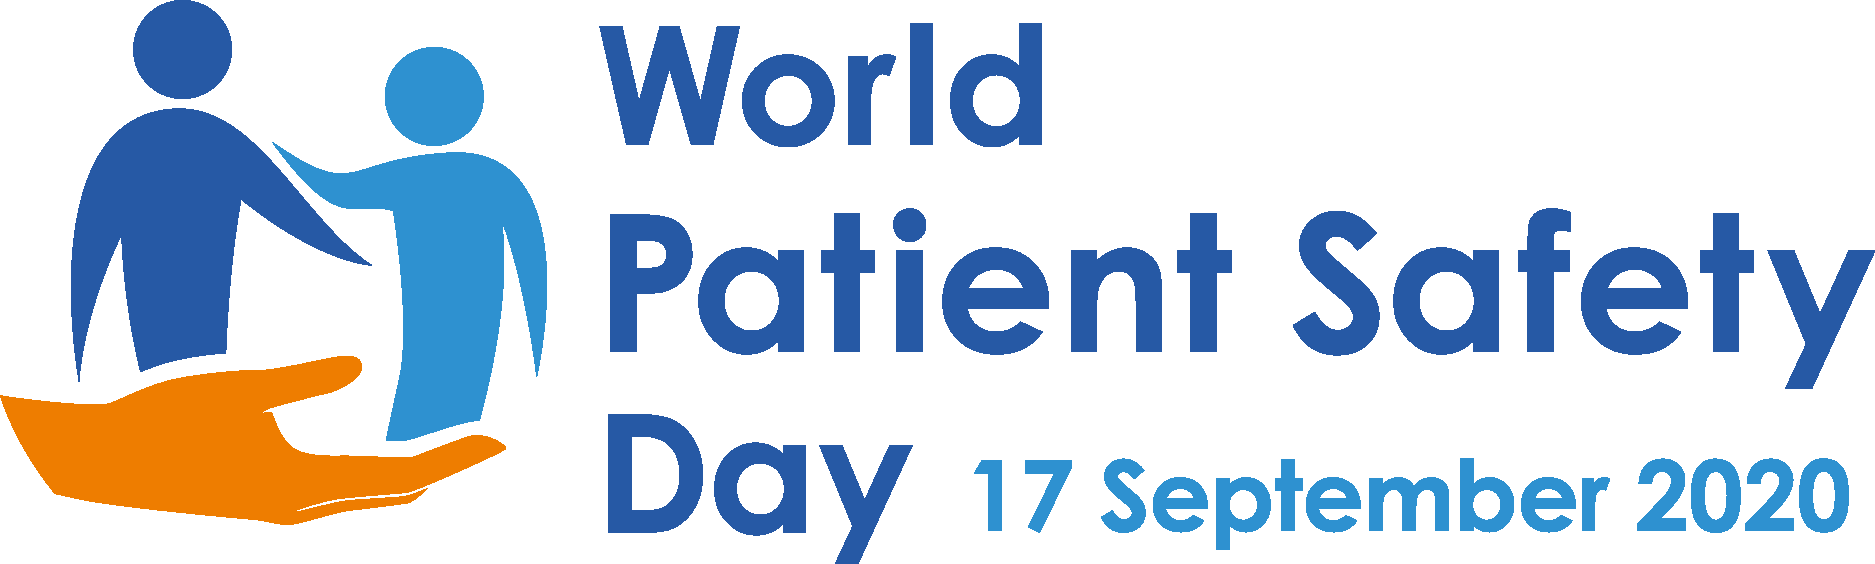 World Patient Safety Day 2020 Logo Vector - (.Ai .PNG .SVG .EPS Free ...